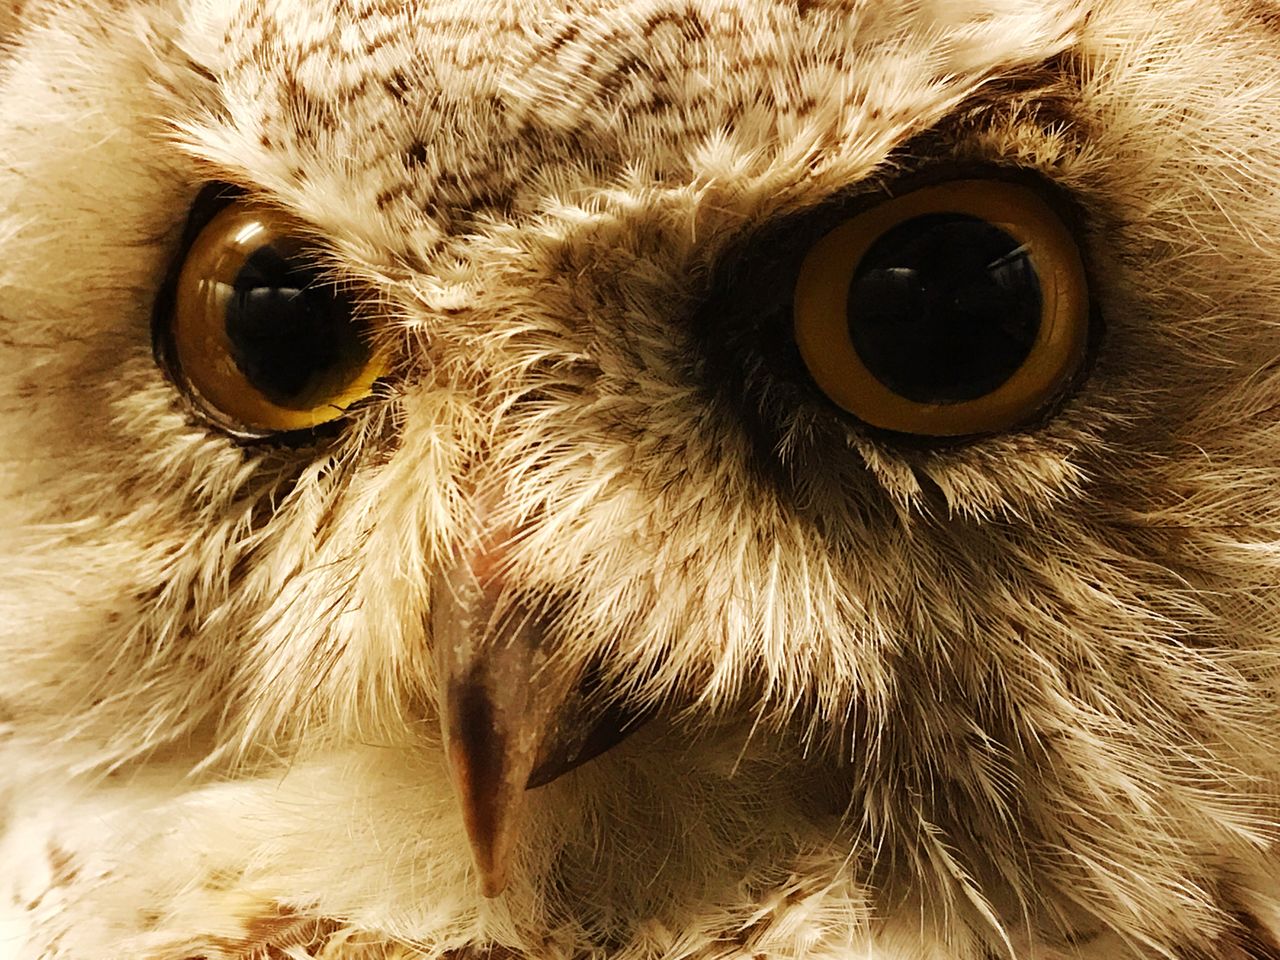 CLOSE-UP PORTRAIT OF OWL OUTDOORS